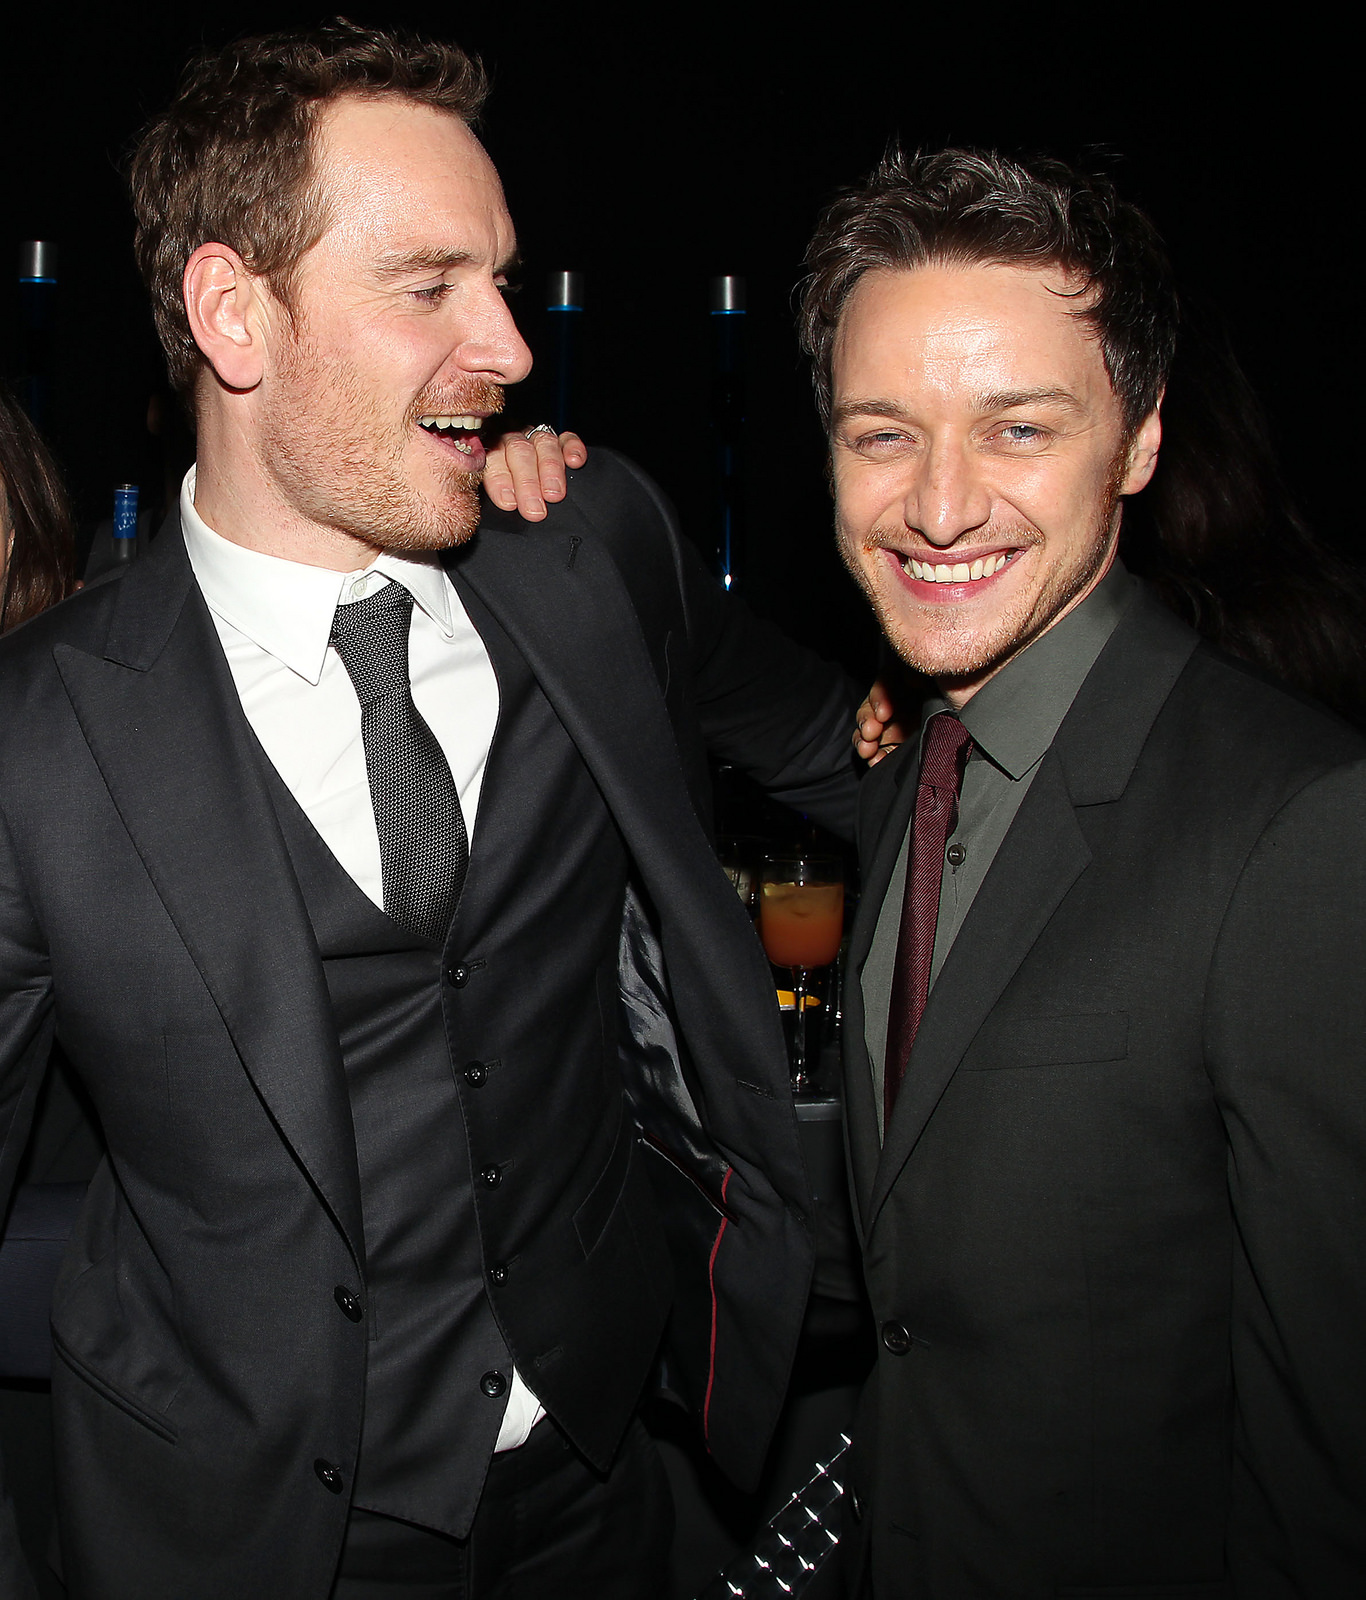 General photo of James McAvoy